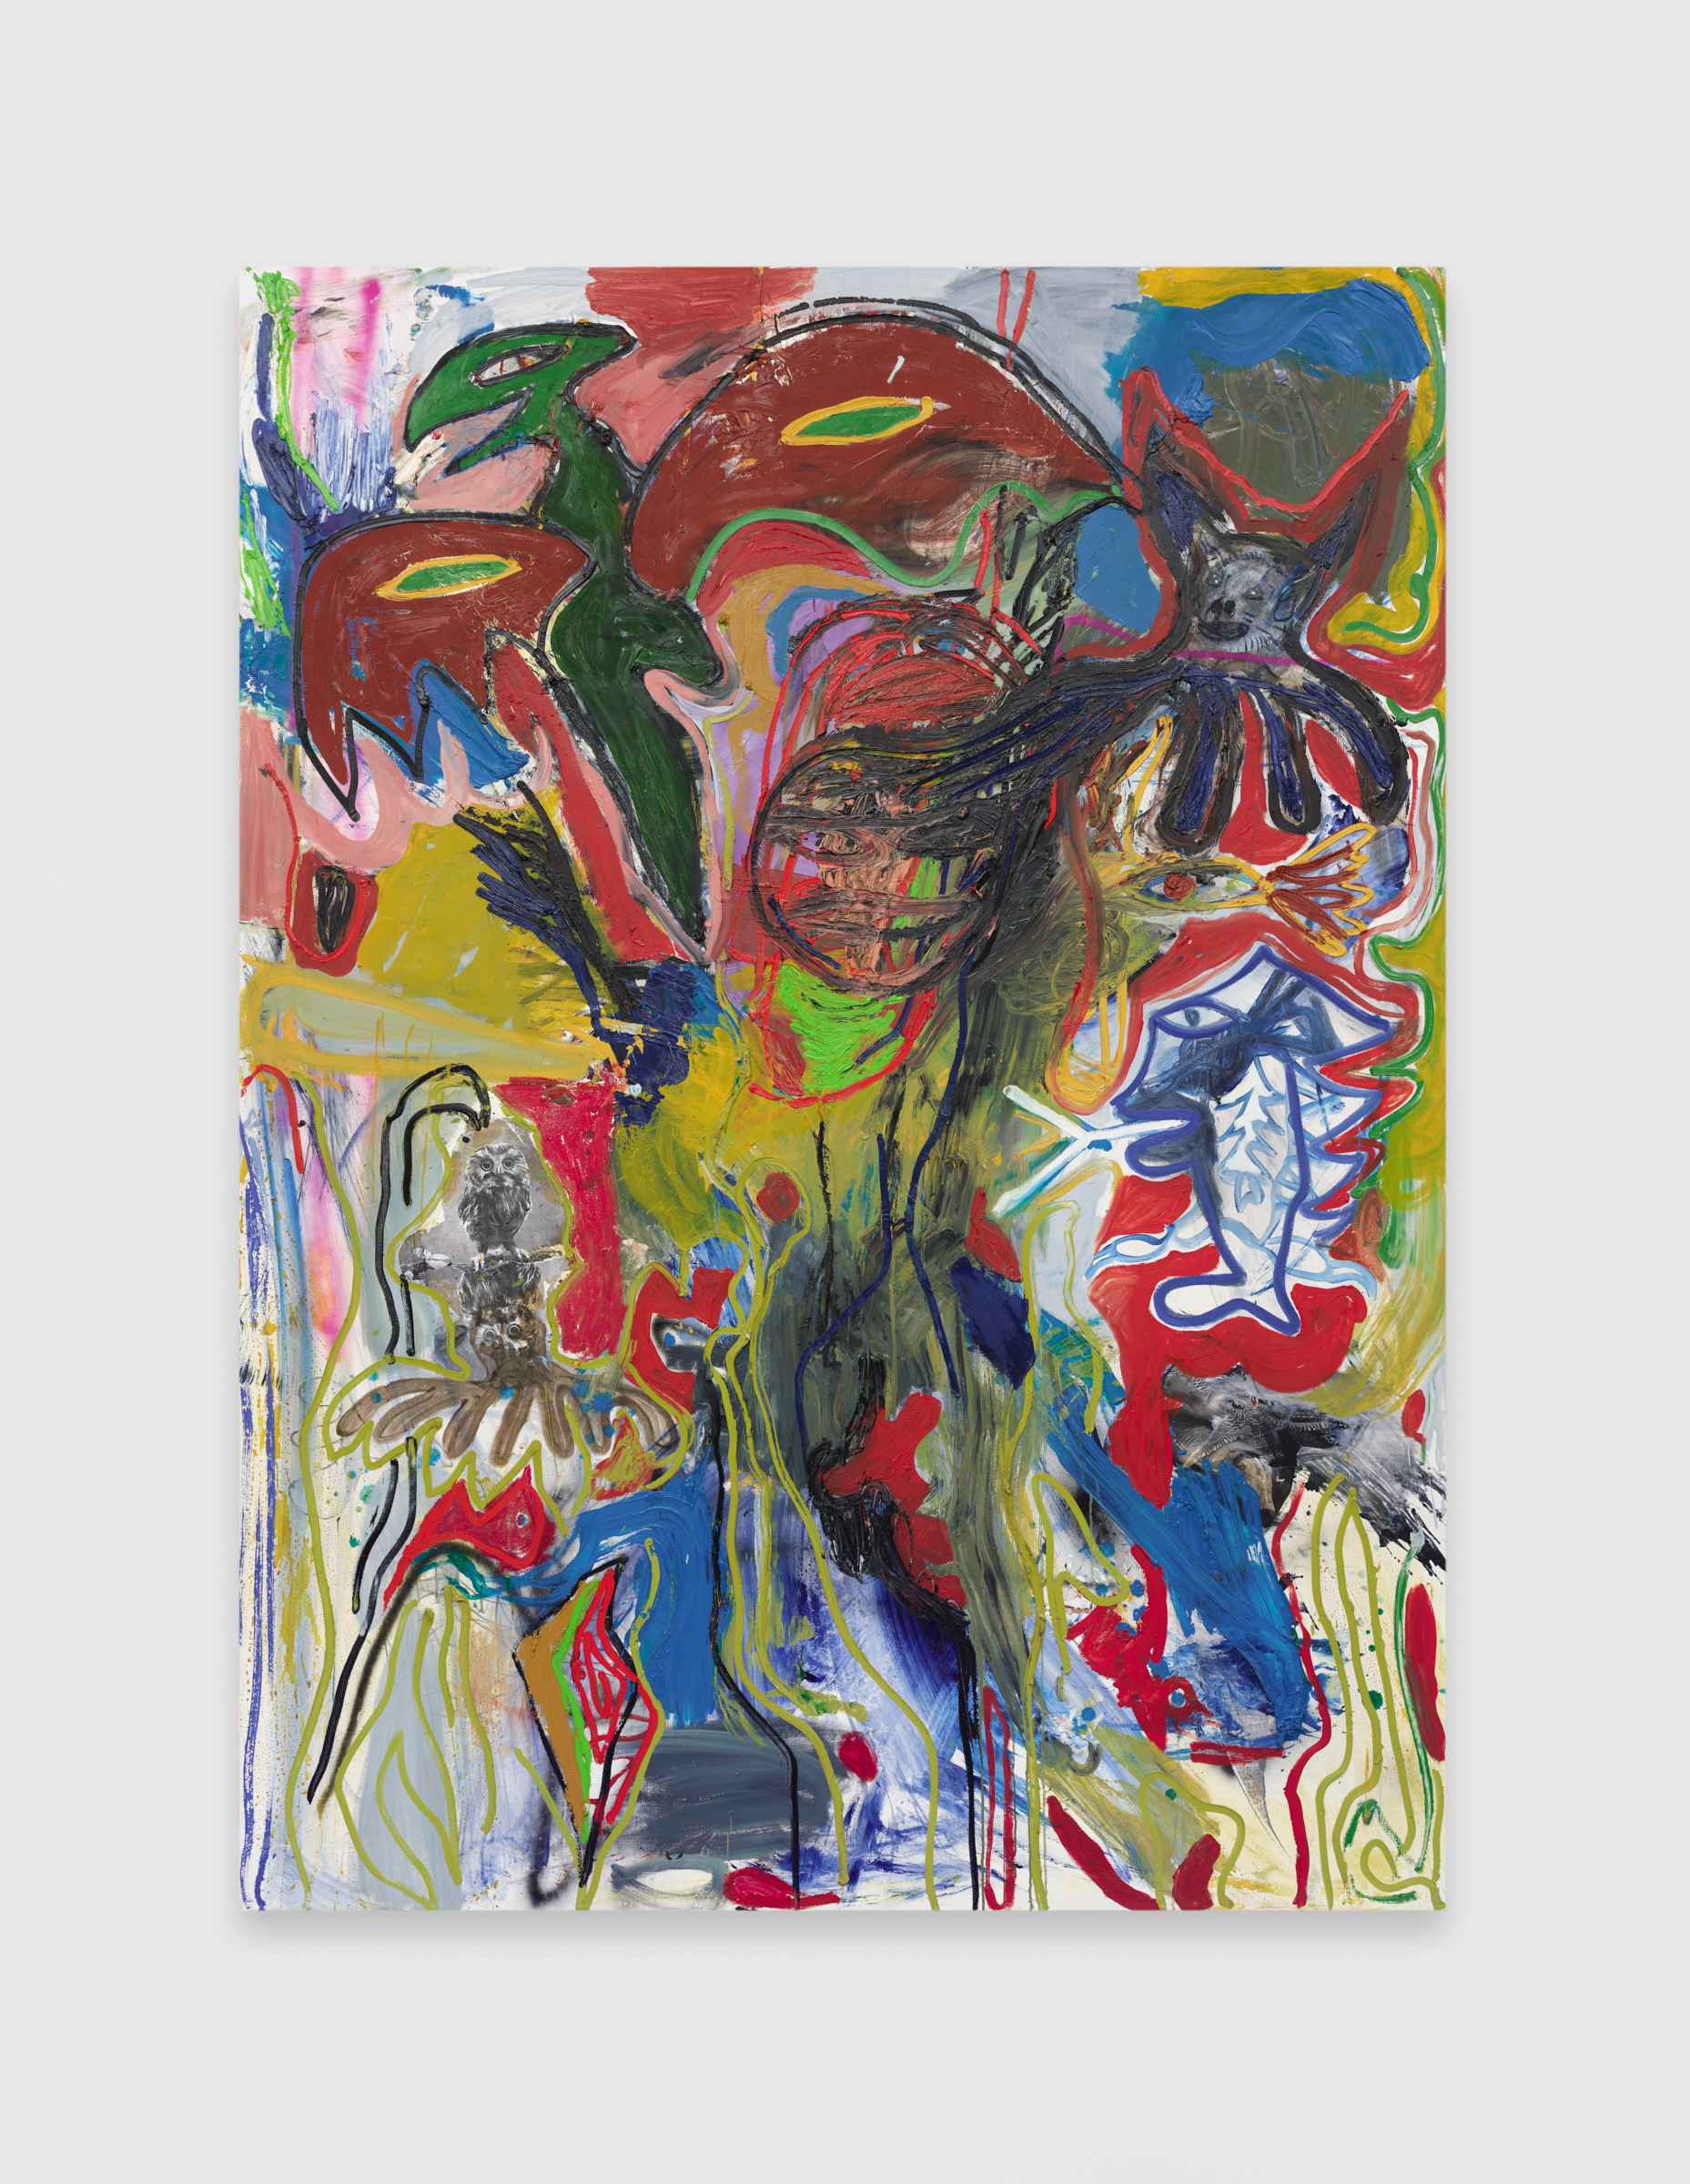 Bill Saylor, Strange Powers, 2015, Photo copy, oil, and spray paint on canvas, 87h x 64w in.